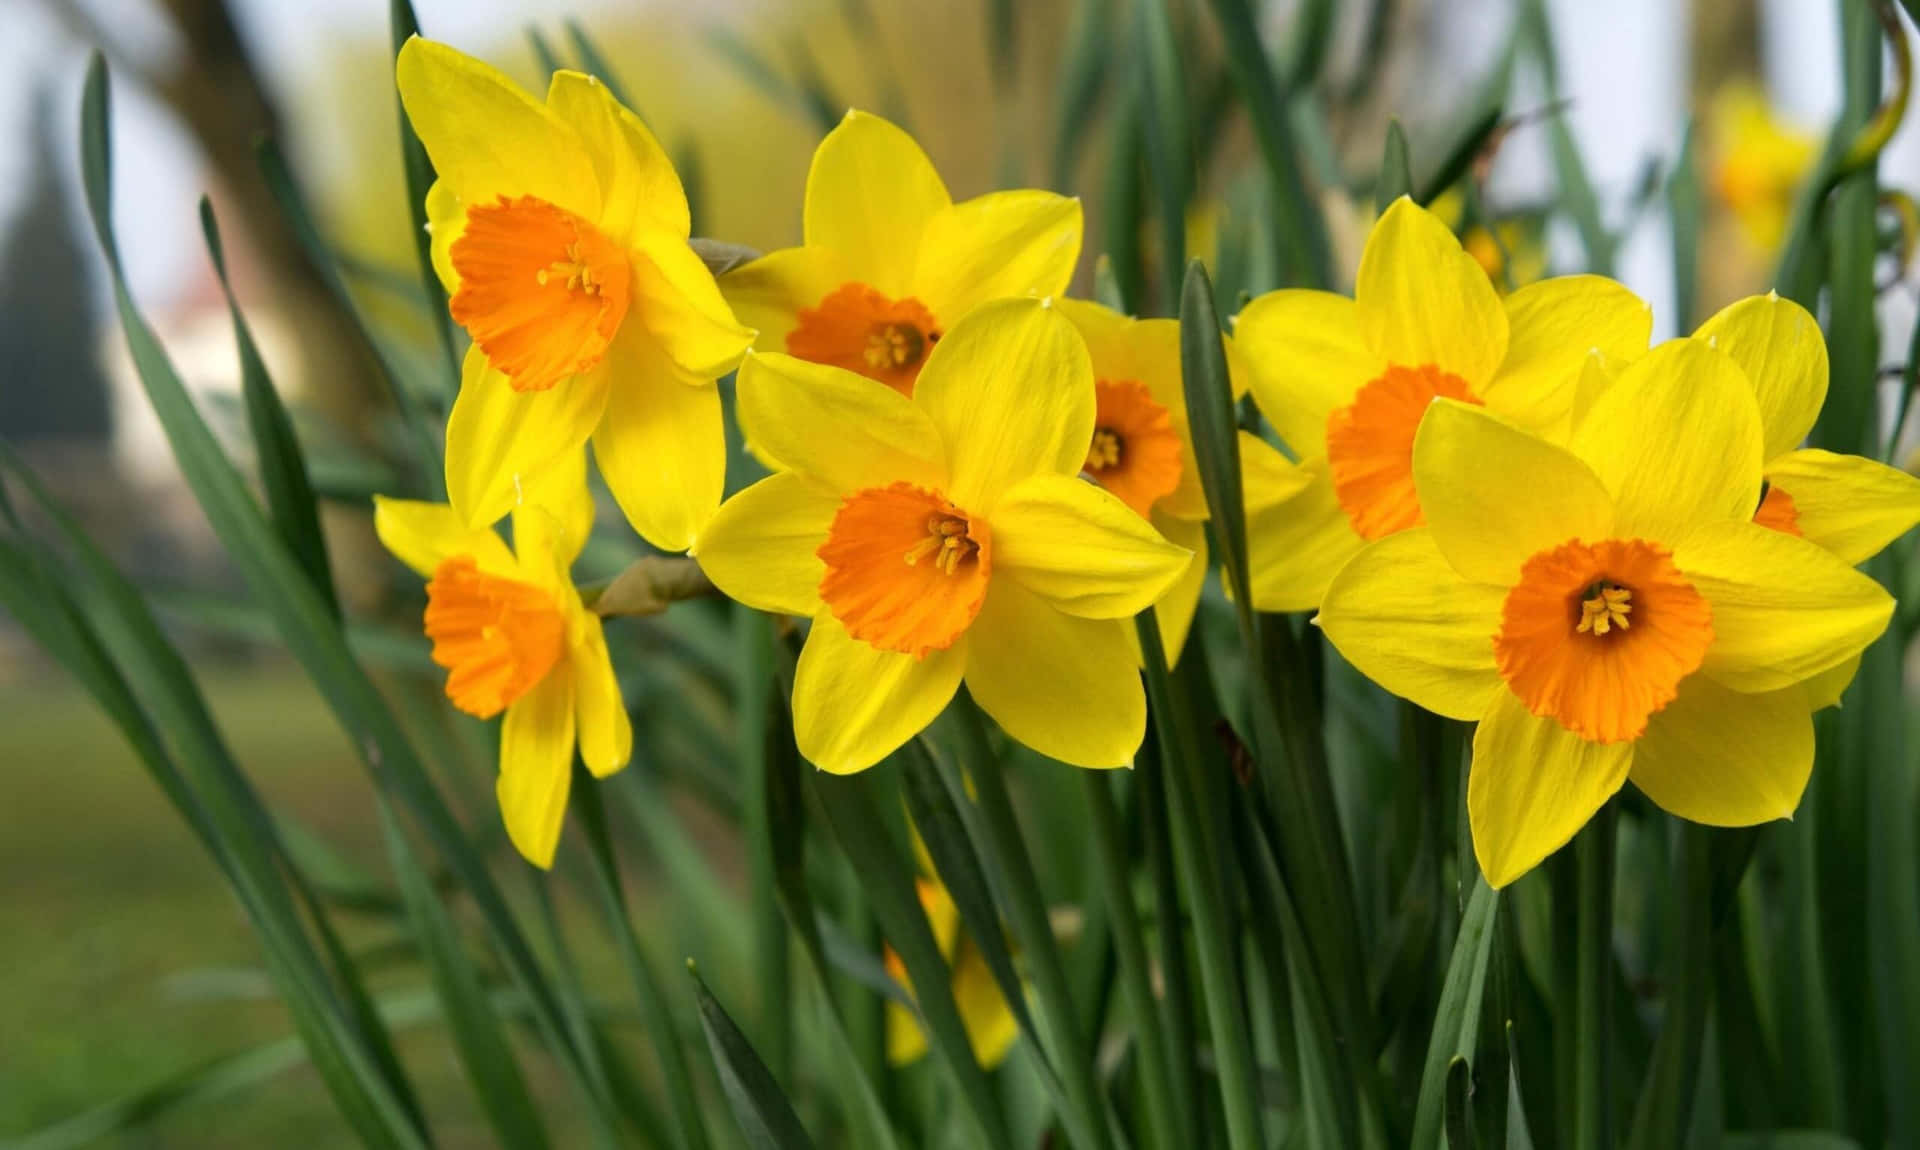 Vibrant Yellow Daffodils Blooming in a Sunny Garden Wallpaper